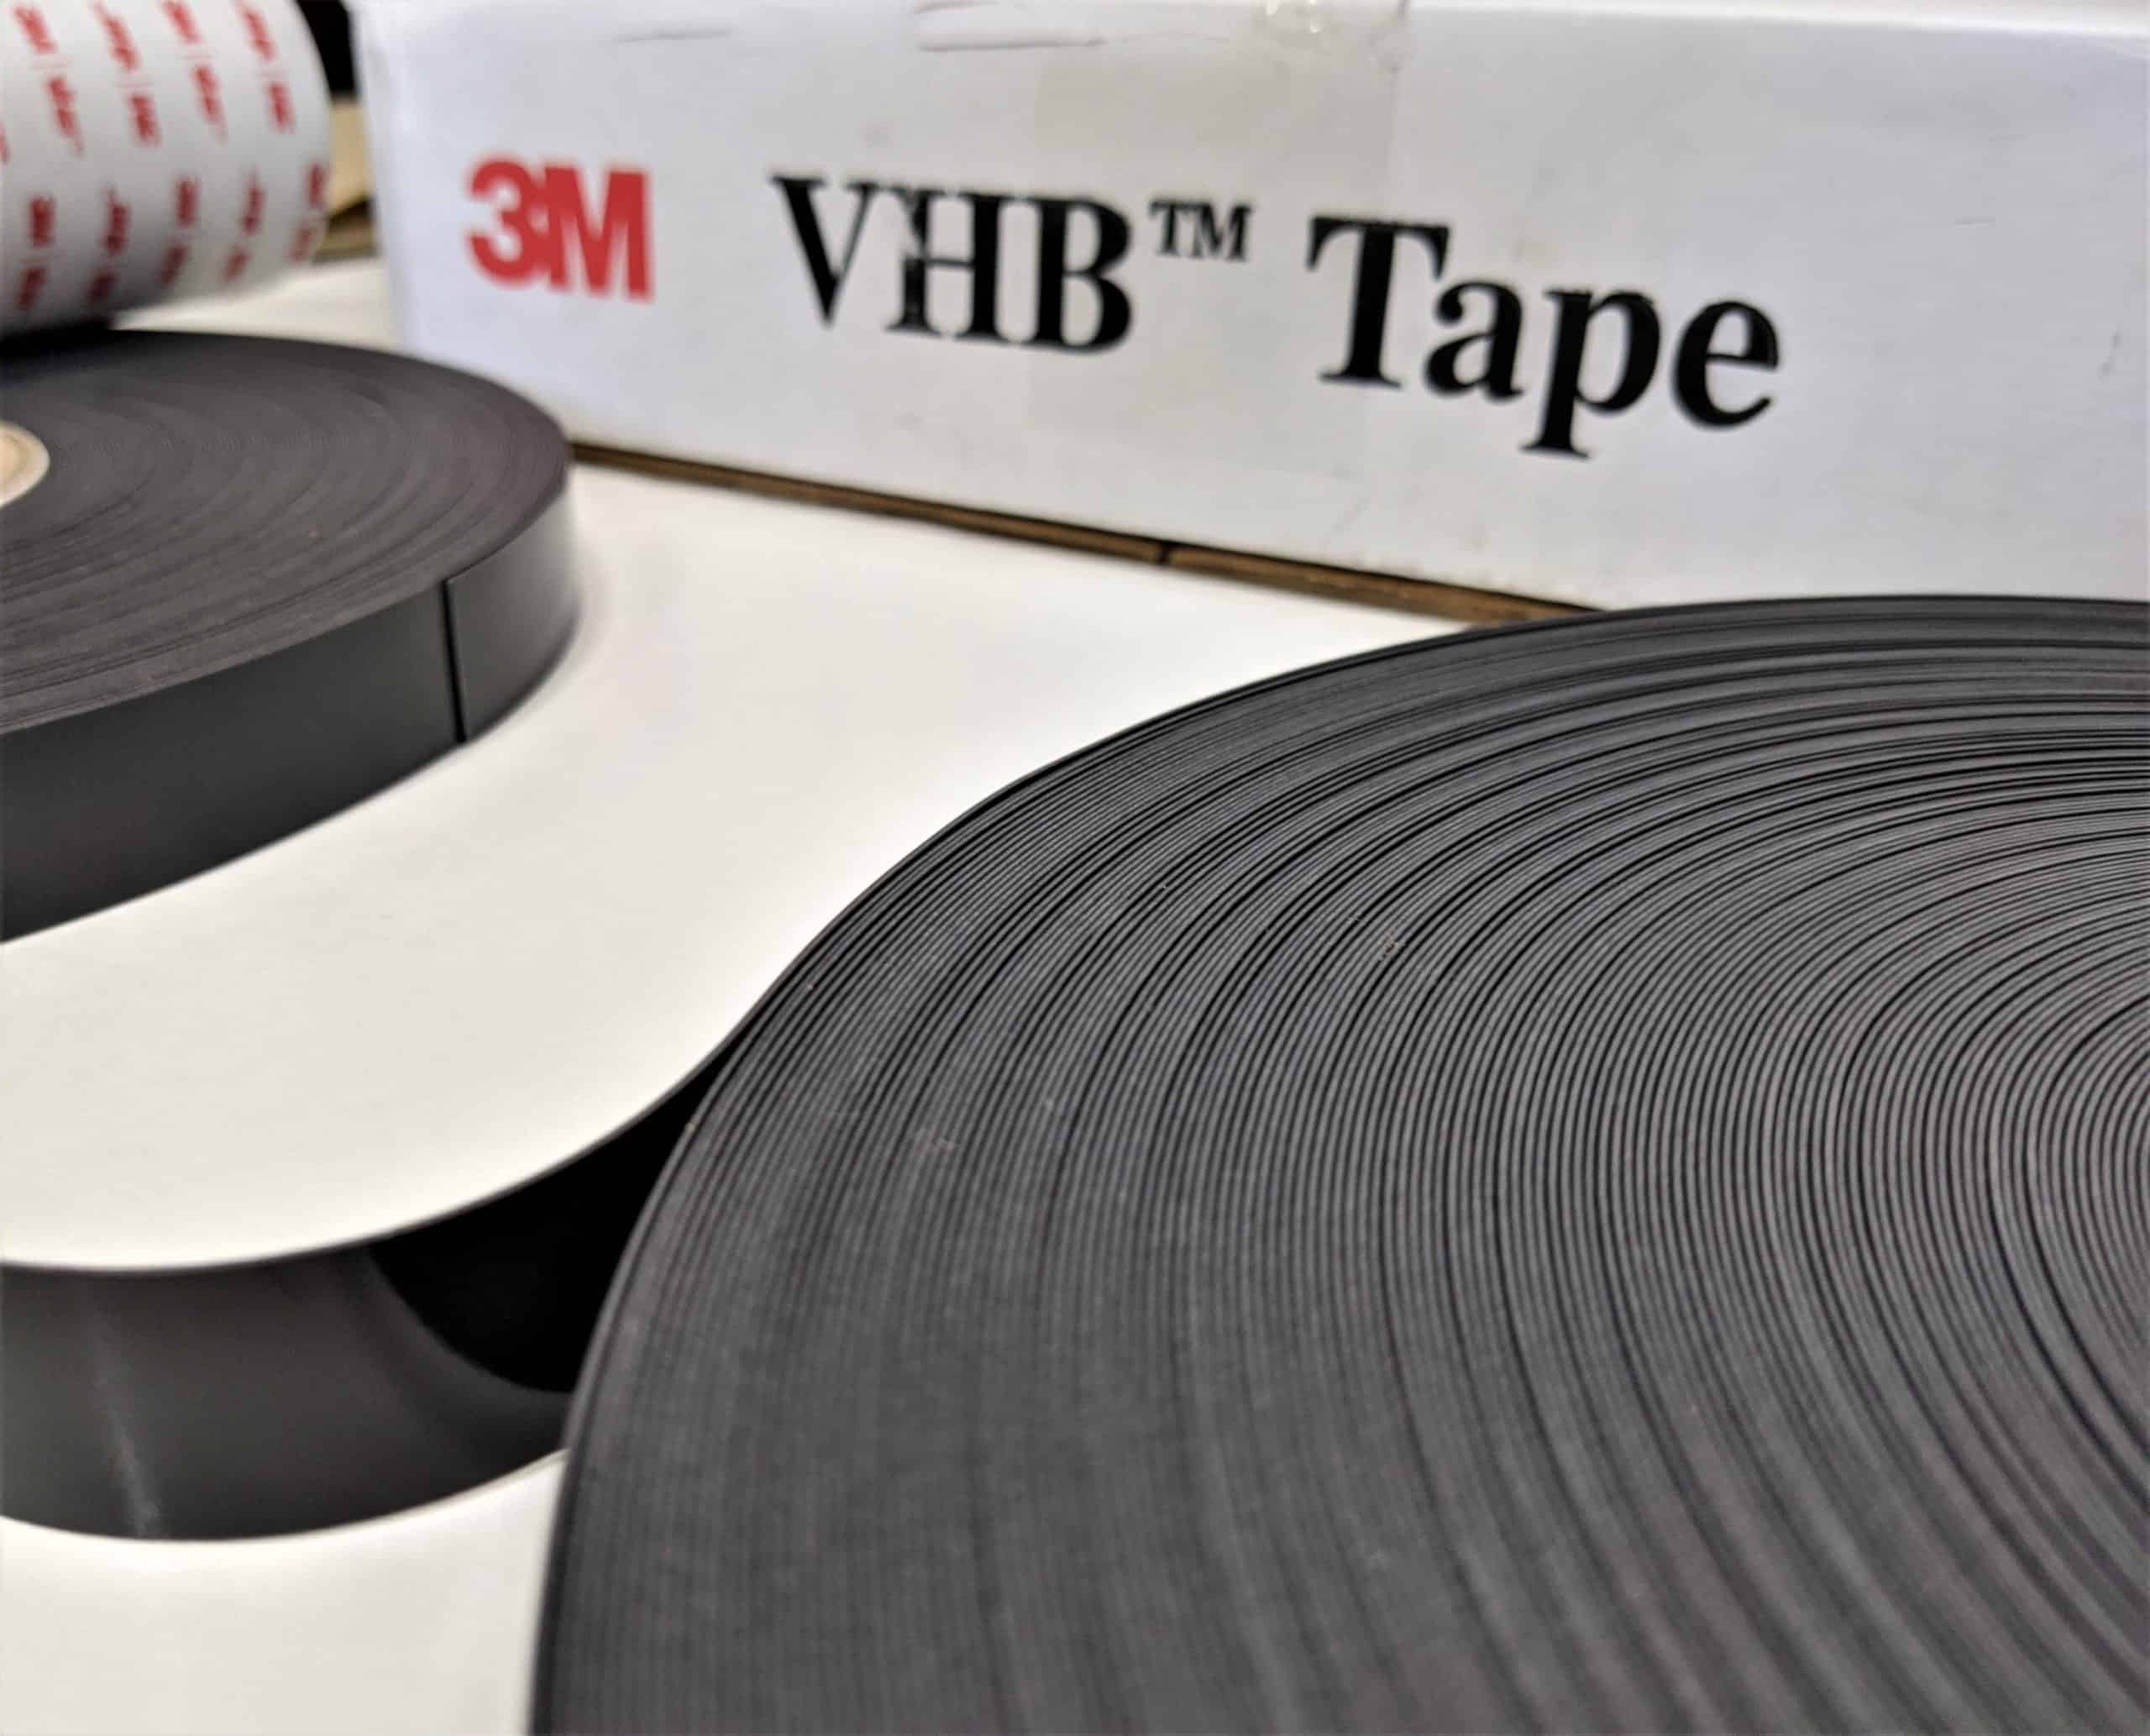 3M VHB Tapes- Information, Properties, Die Cutting